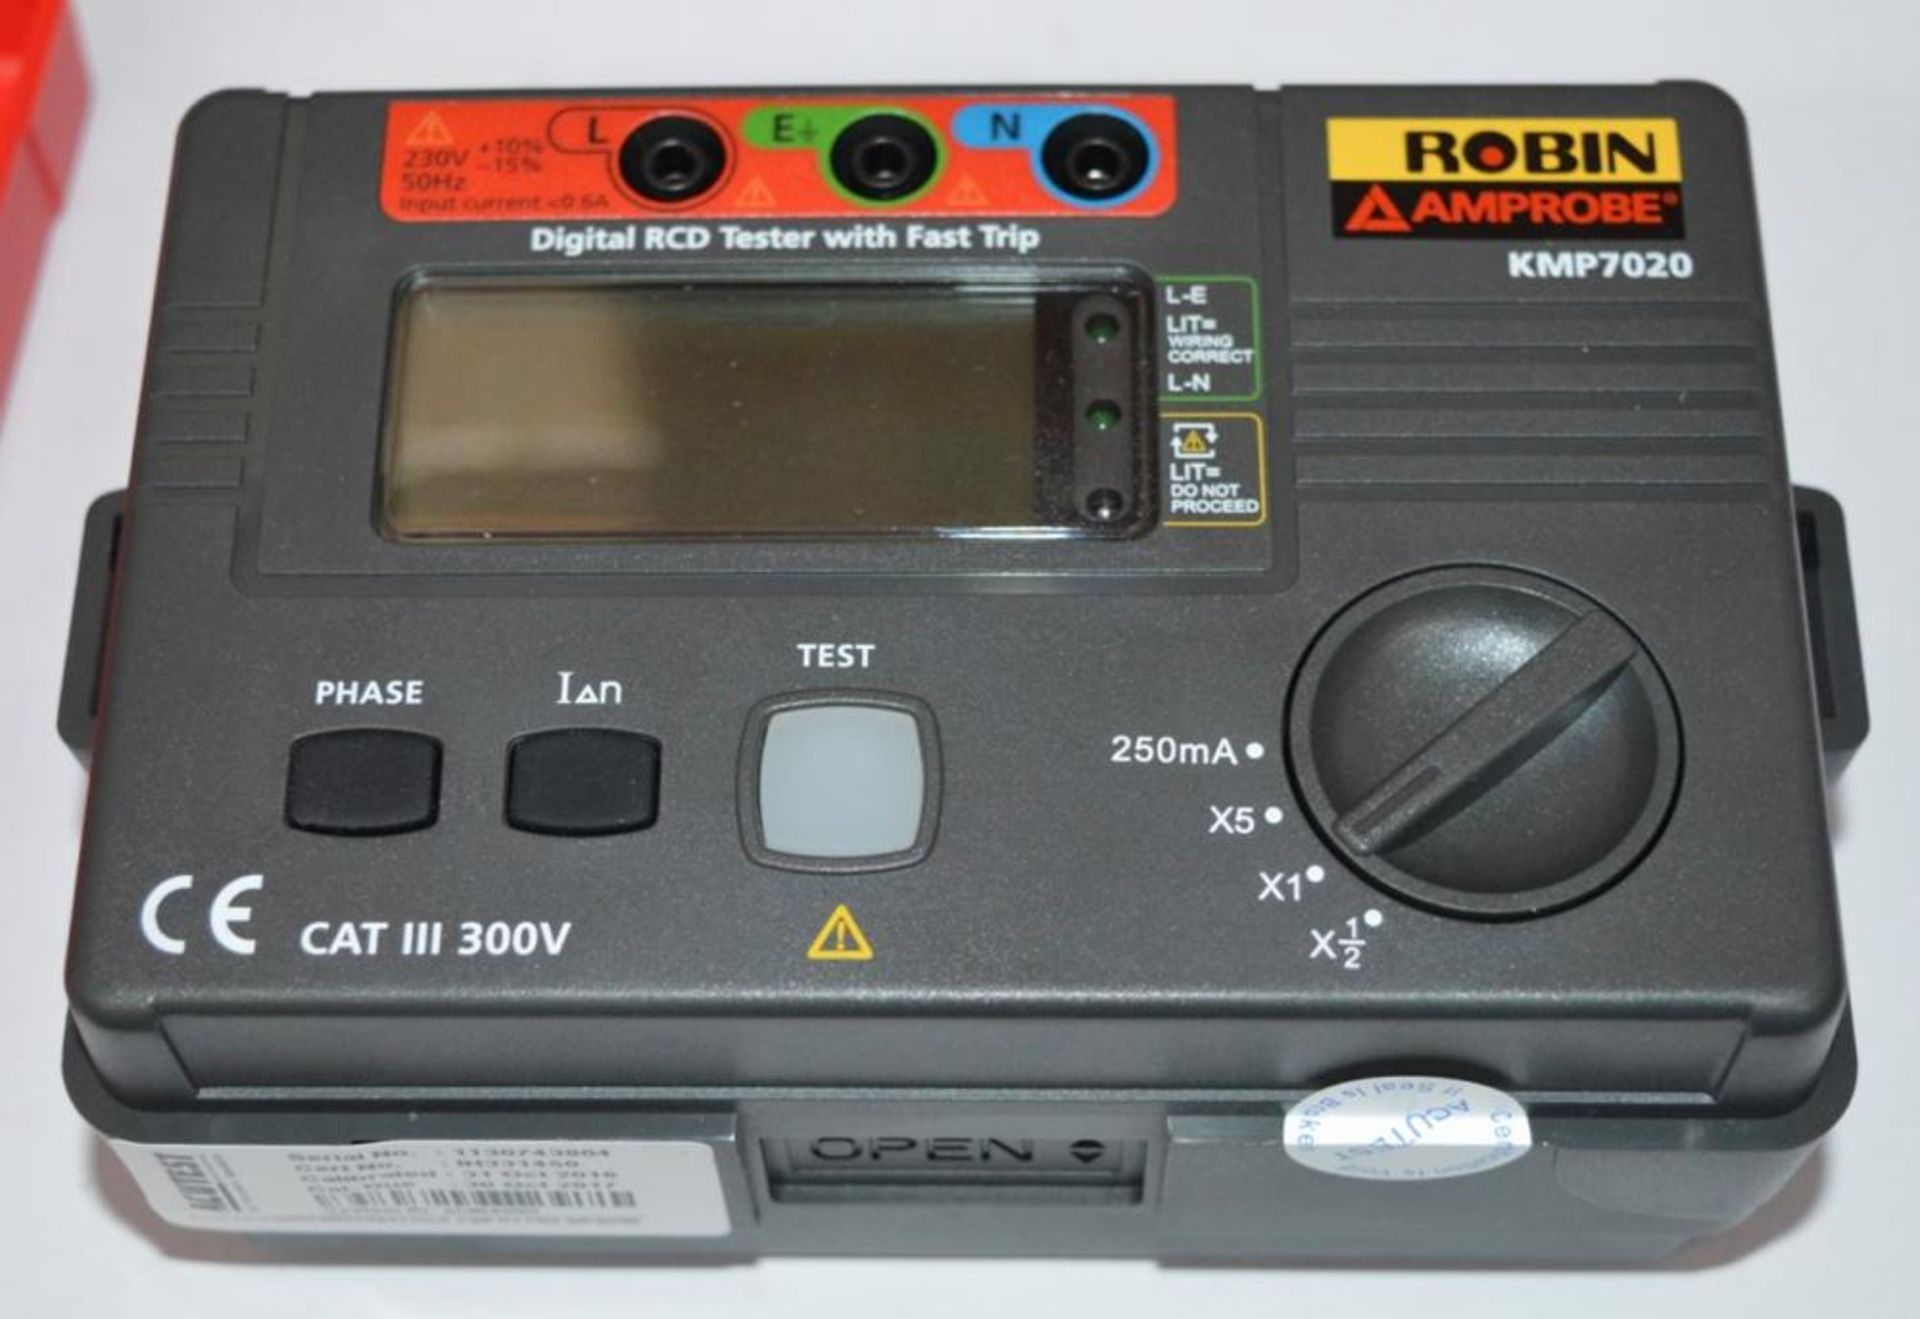 1 x Robin Amprobe Digital RCD Tester With Fast Trip - Model KMP7020 - Boxed With All Accessories - C - Image 5 of 12